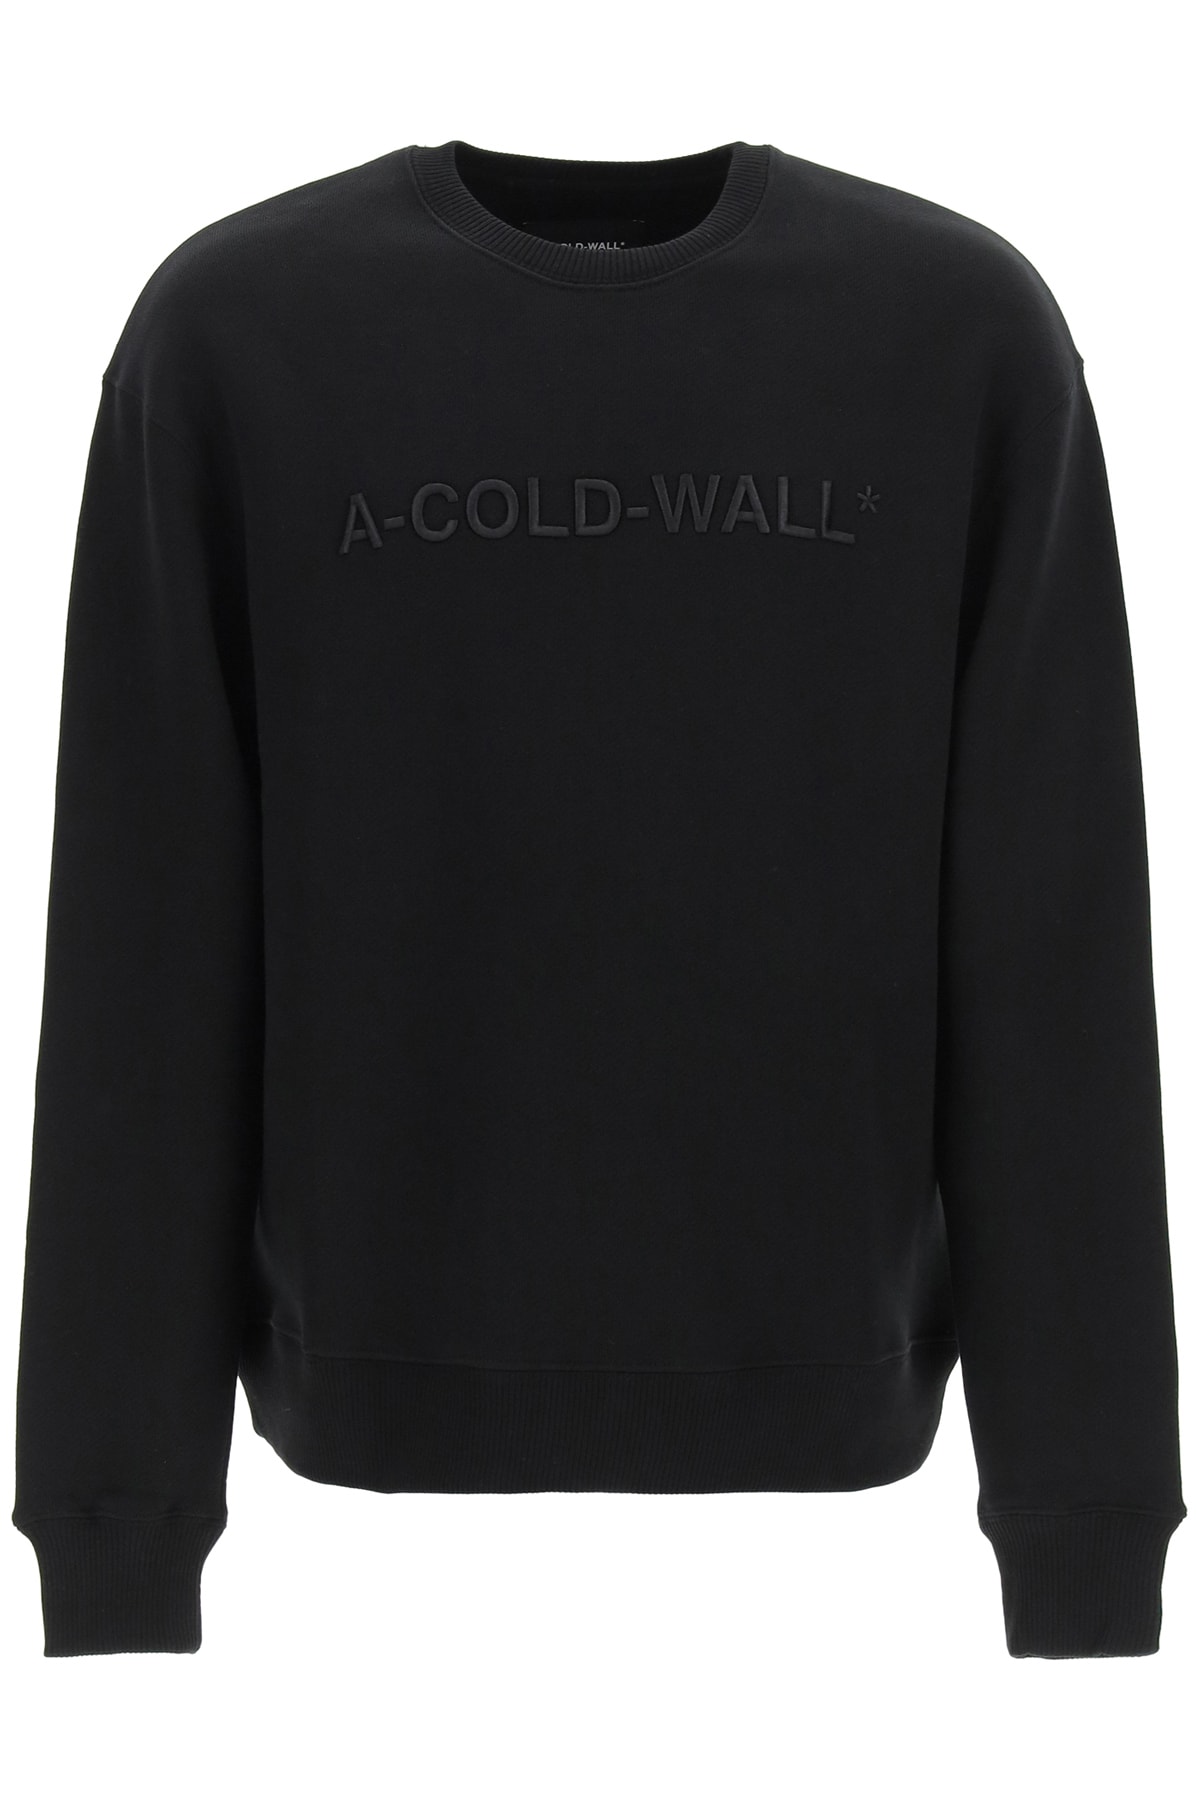 A-COLD-WALL Loopback Cotton Sweatshirt With Embroidered Logo